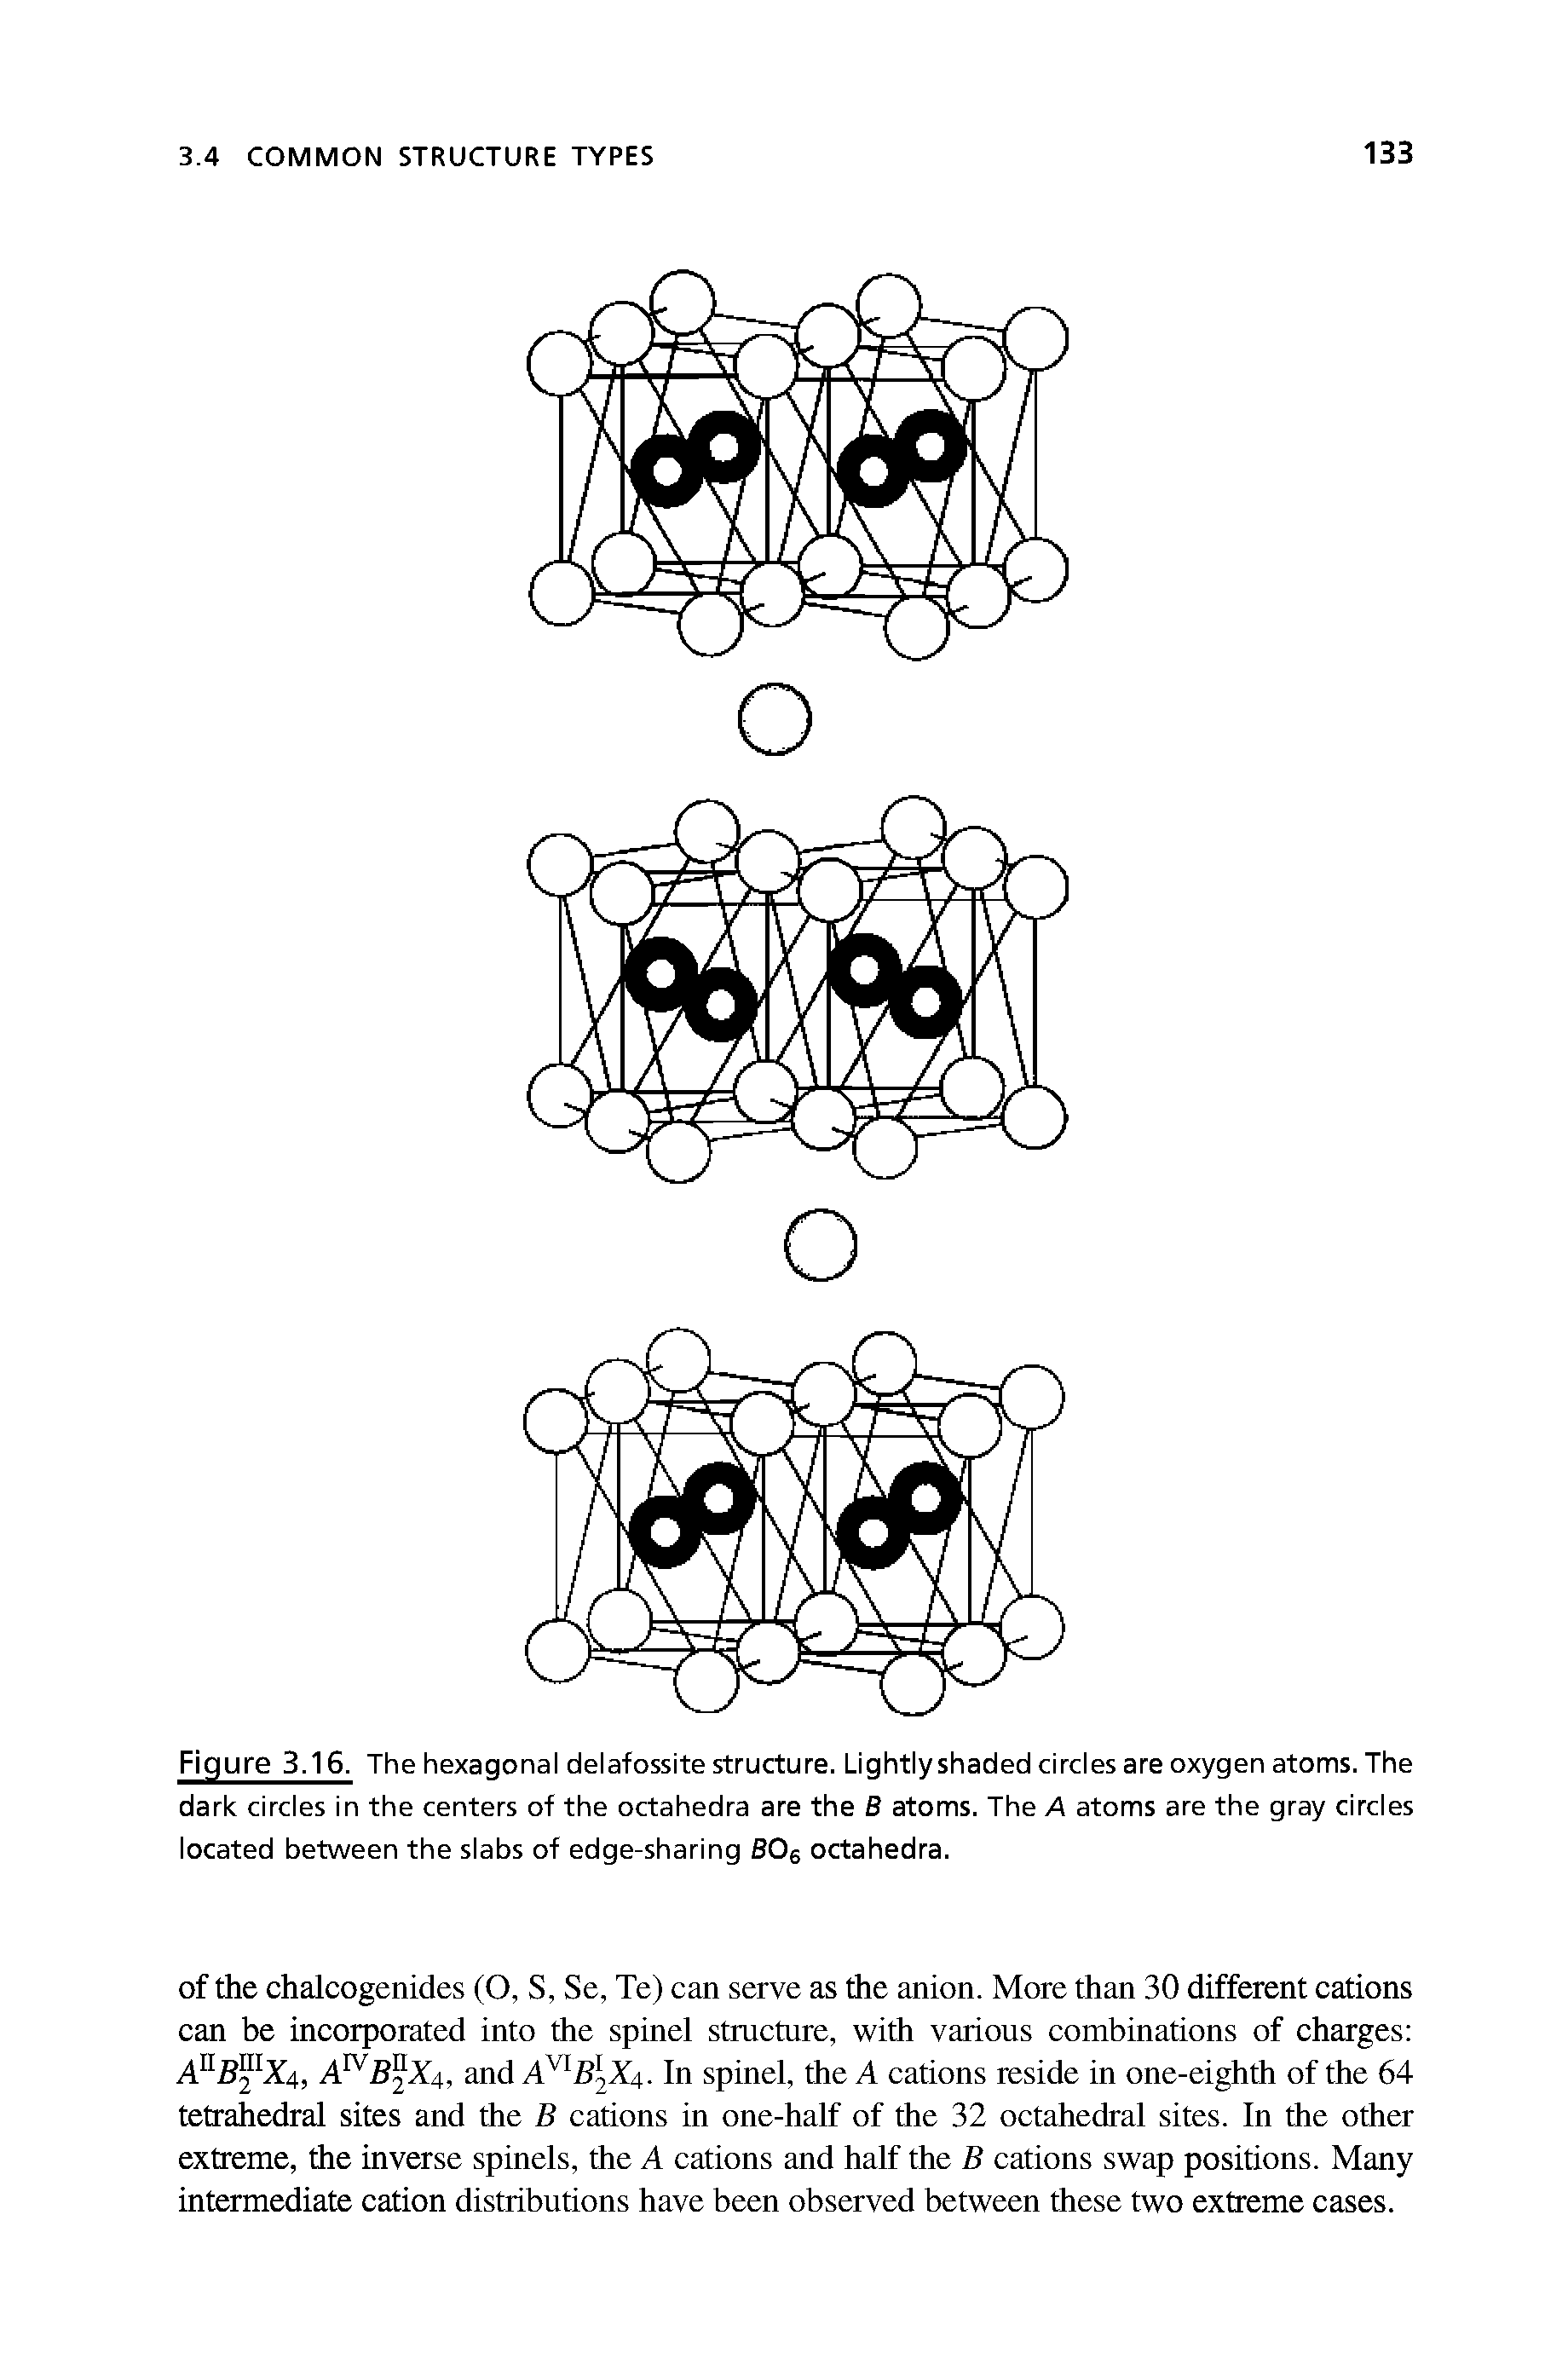 Figure 3.16. The hexagonal delafossite structure. Lightly shaded circles are oxygen atoms. The dark circles in the centers of the octahedra are the B atoms. The A atoms are the gray circles located between the slabs of edge-sharing SOg octahedra.